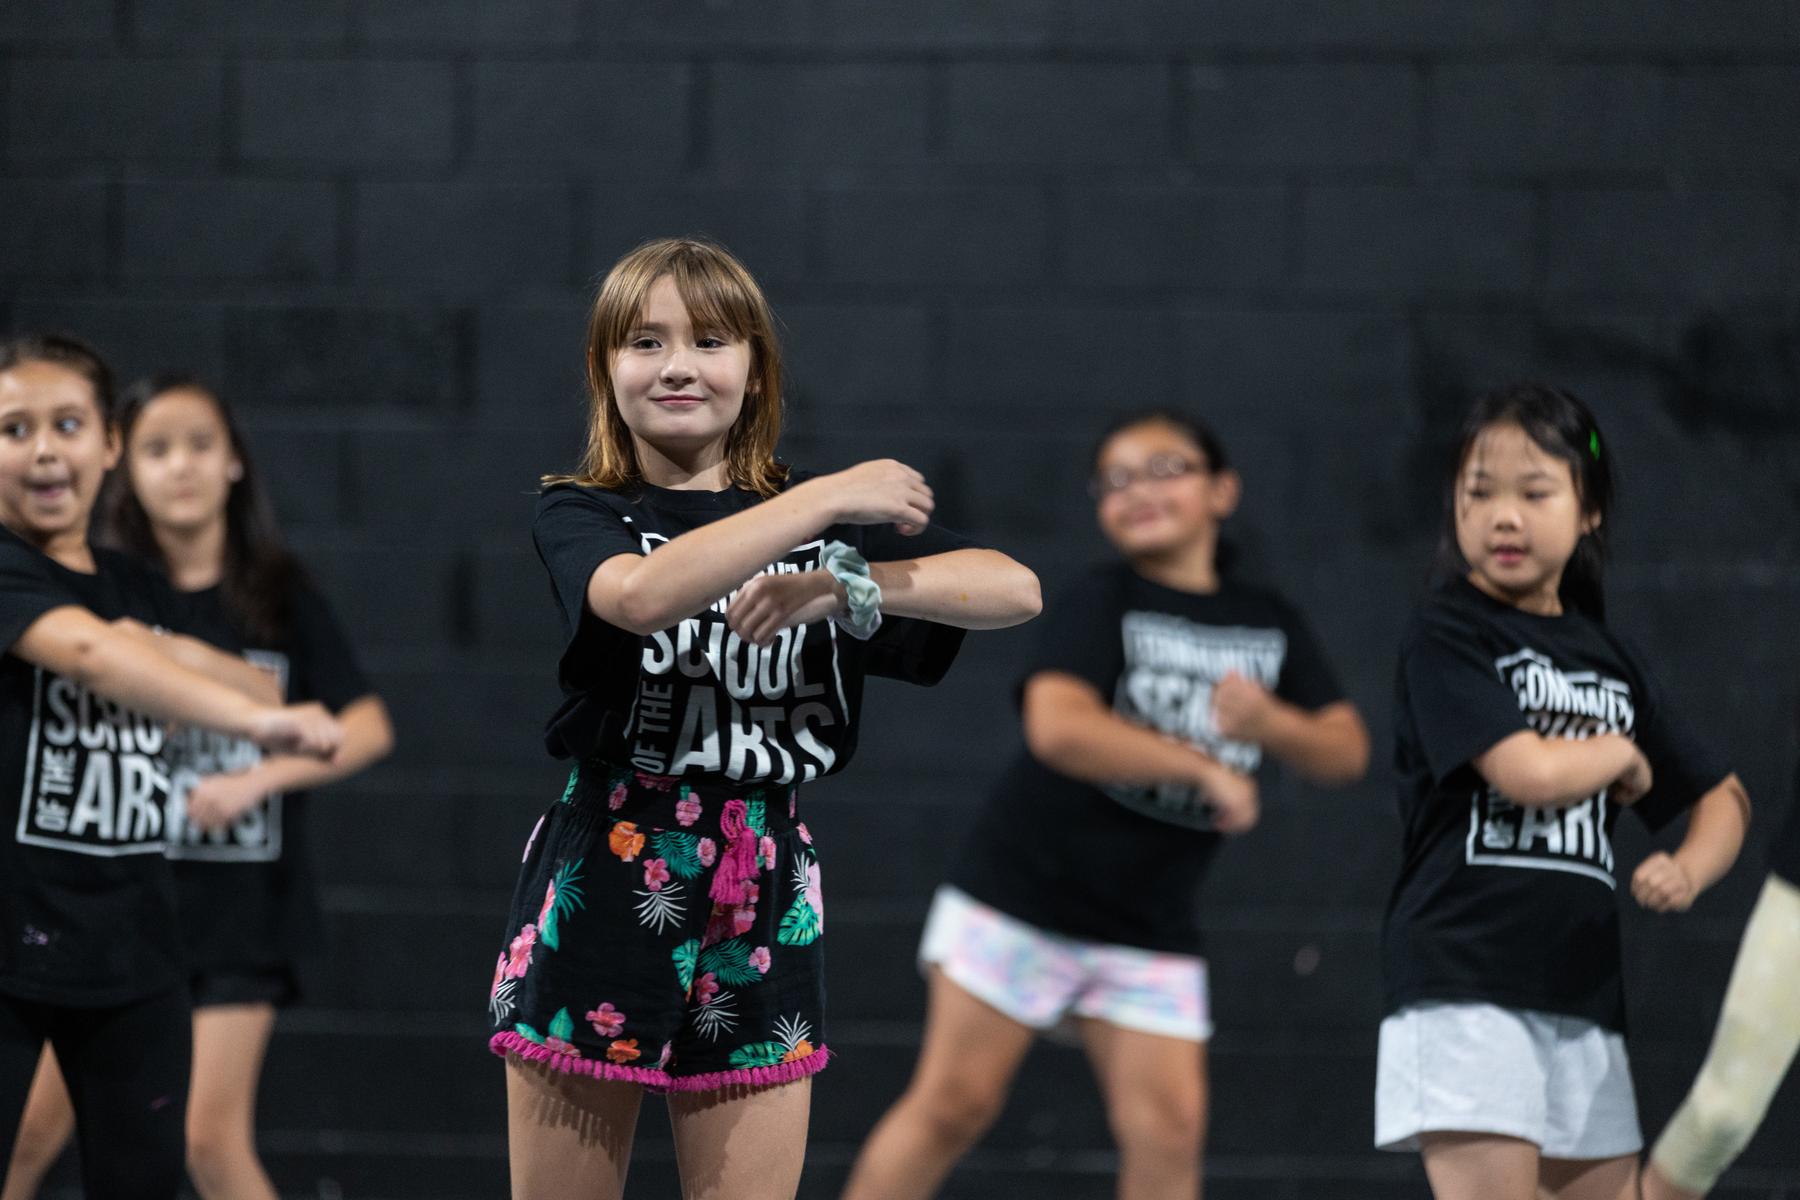 Students showcase a dance routine at Trahern Theatre during this year's CSA Summer Arts Camp.